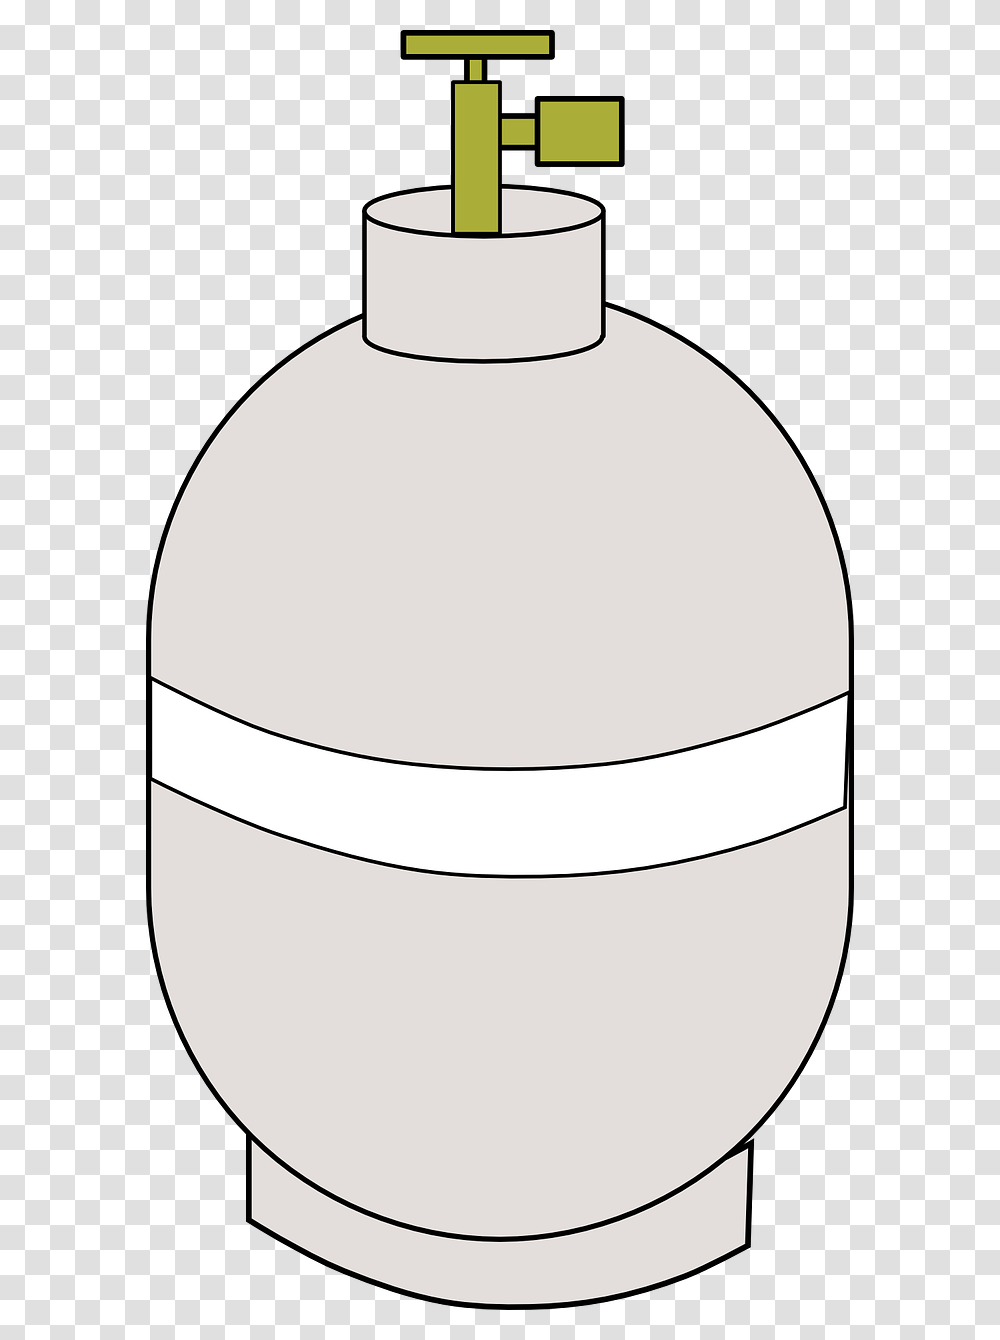 Propane Bottle Cookout Grill Free Photo, Ball, Snowman, Outdoors, Nature Transparent Png